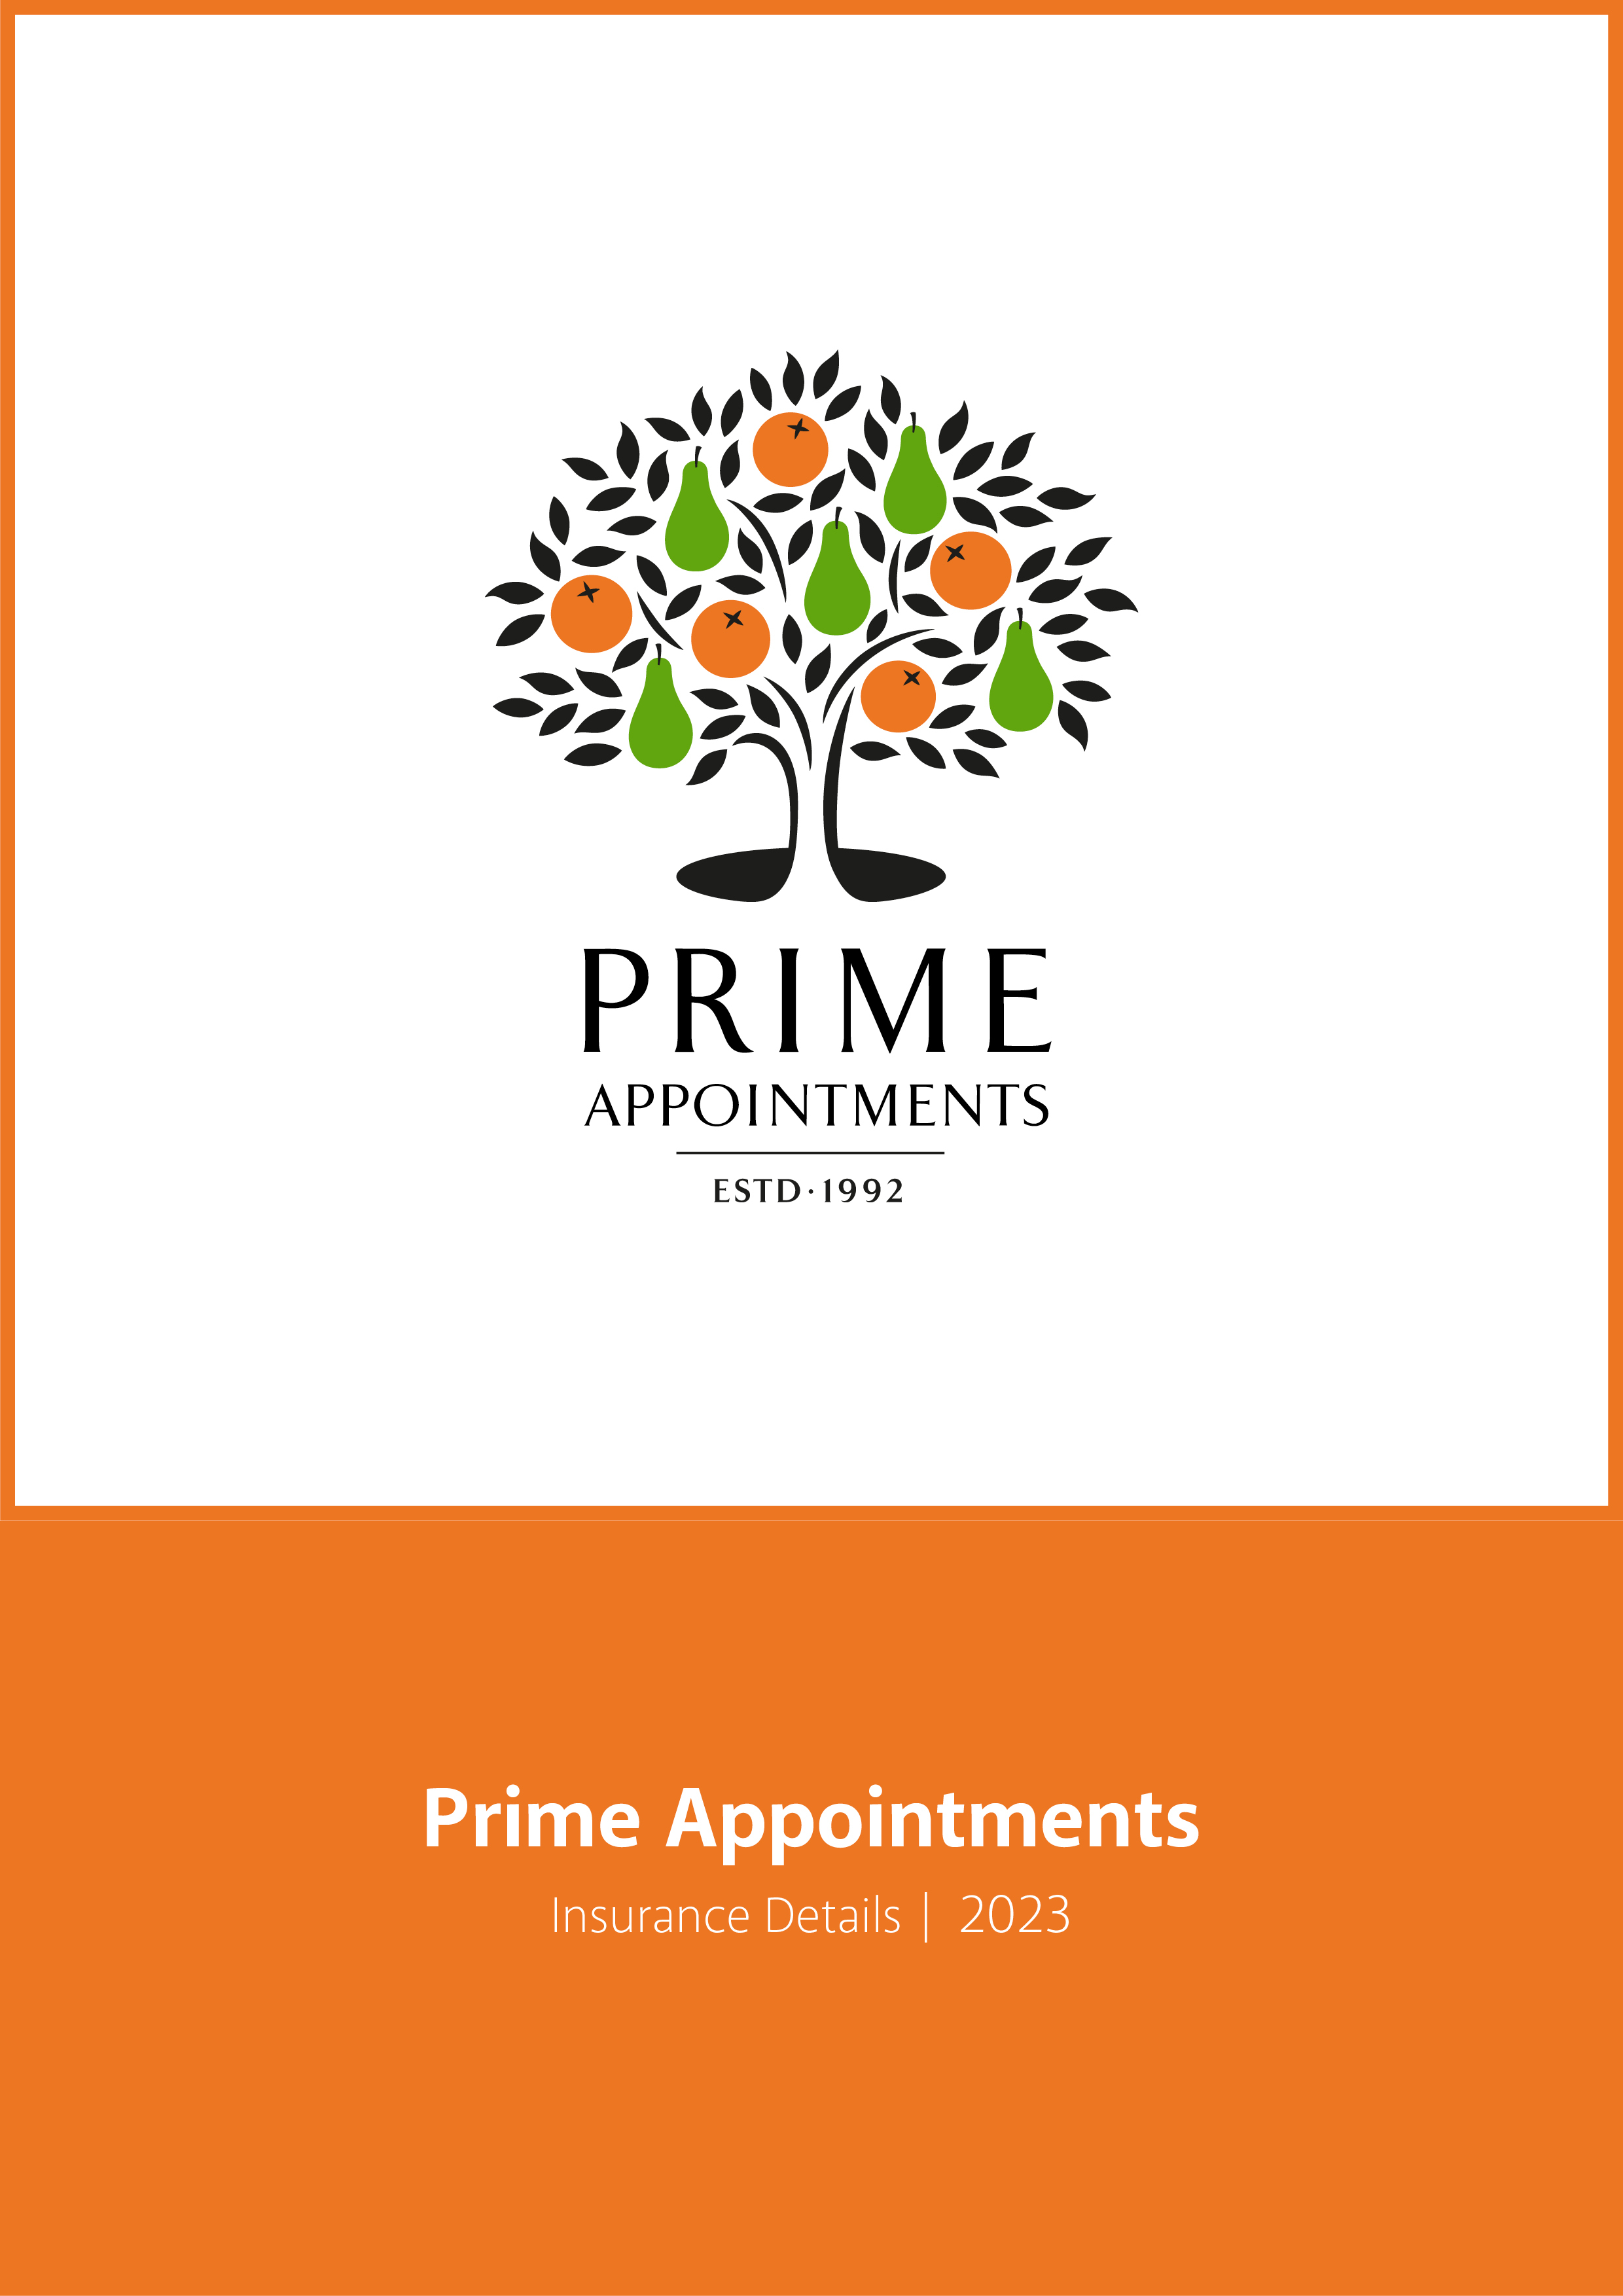 Prime Appointments Insurance Details Cover 2023